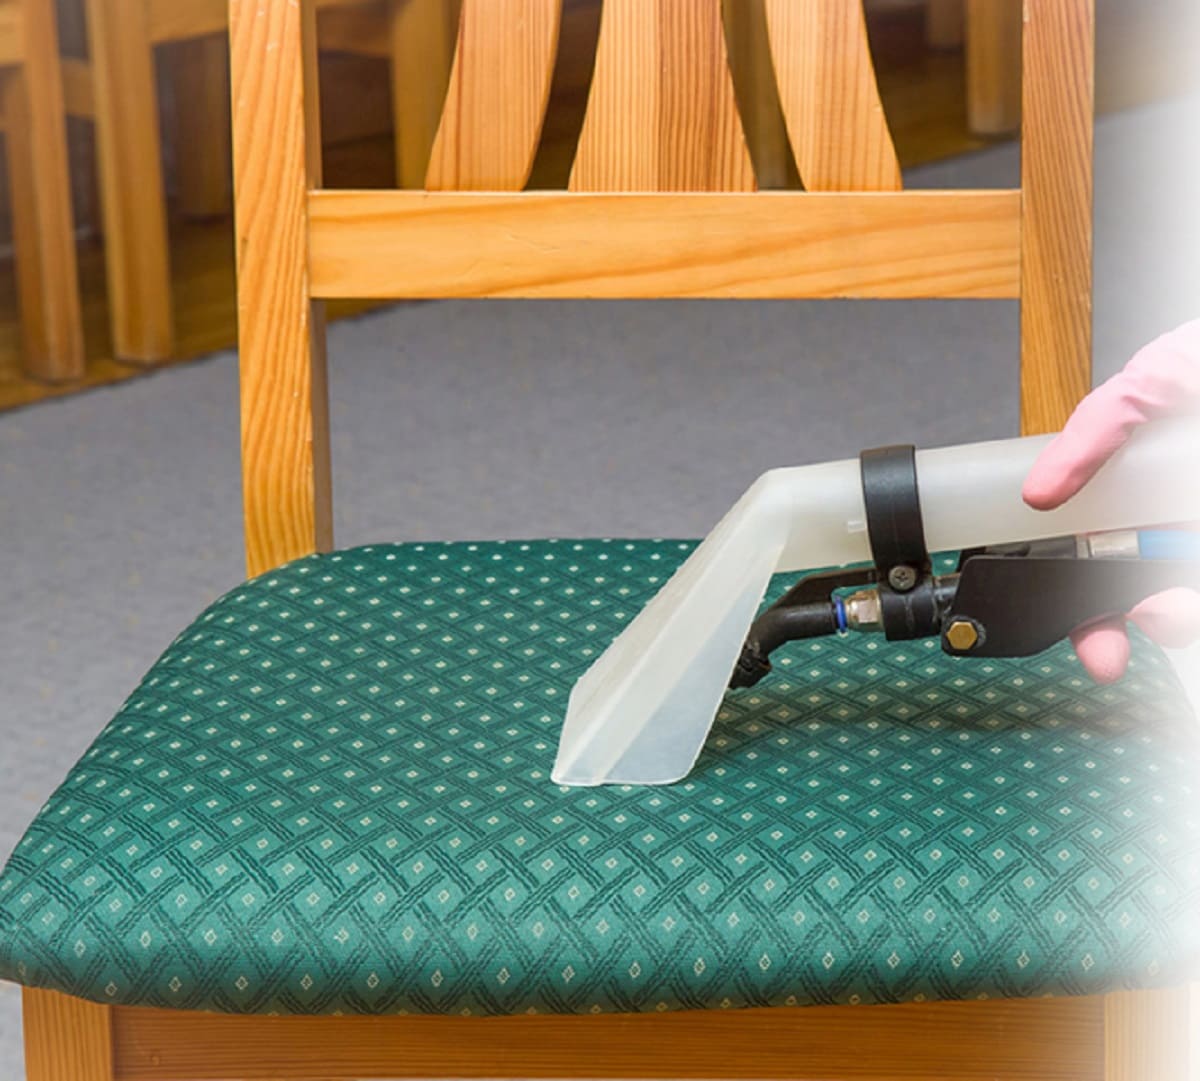 How Can You Clean Fabric Dining Room Chairs?